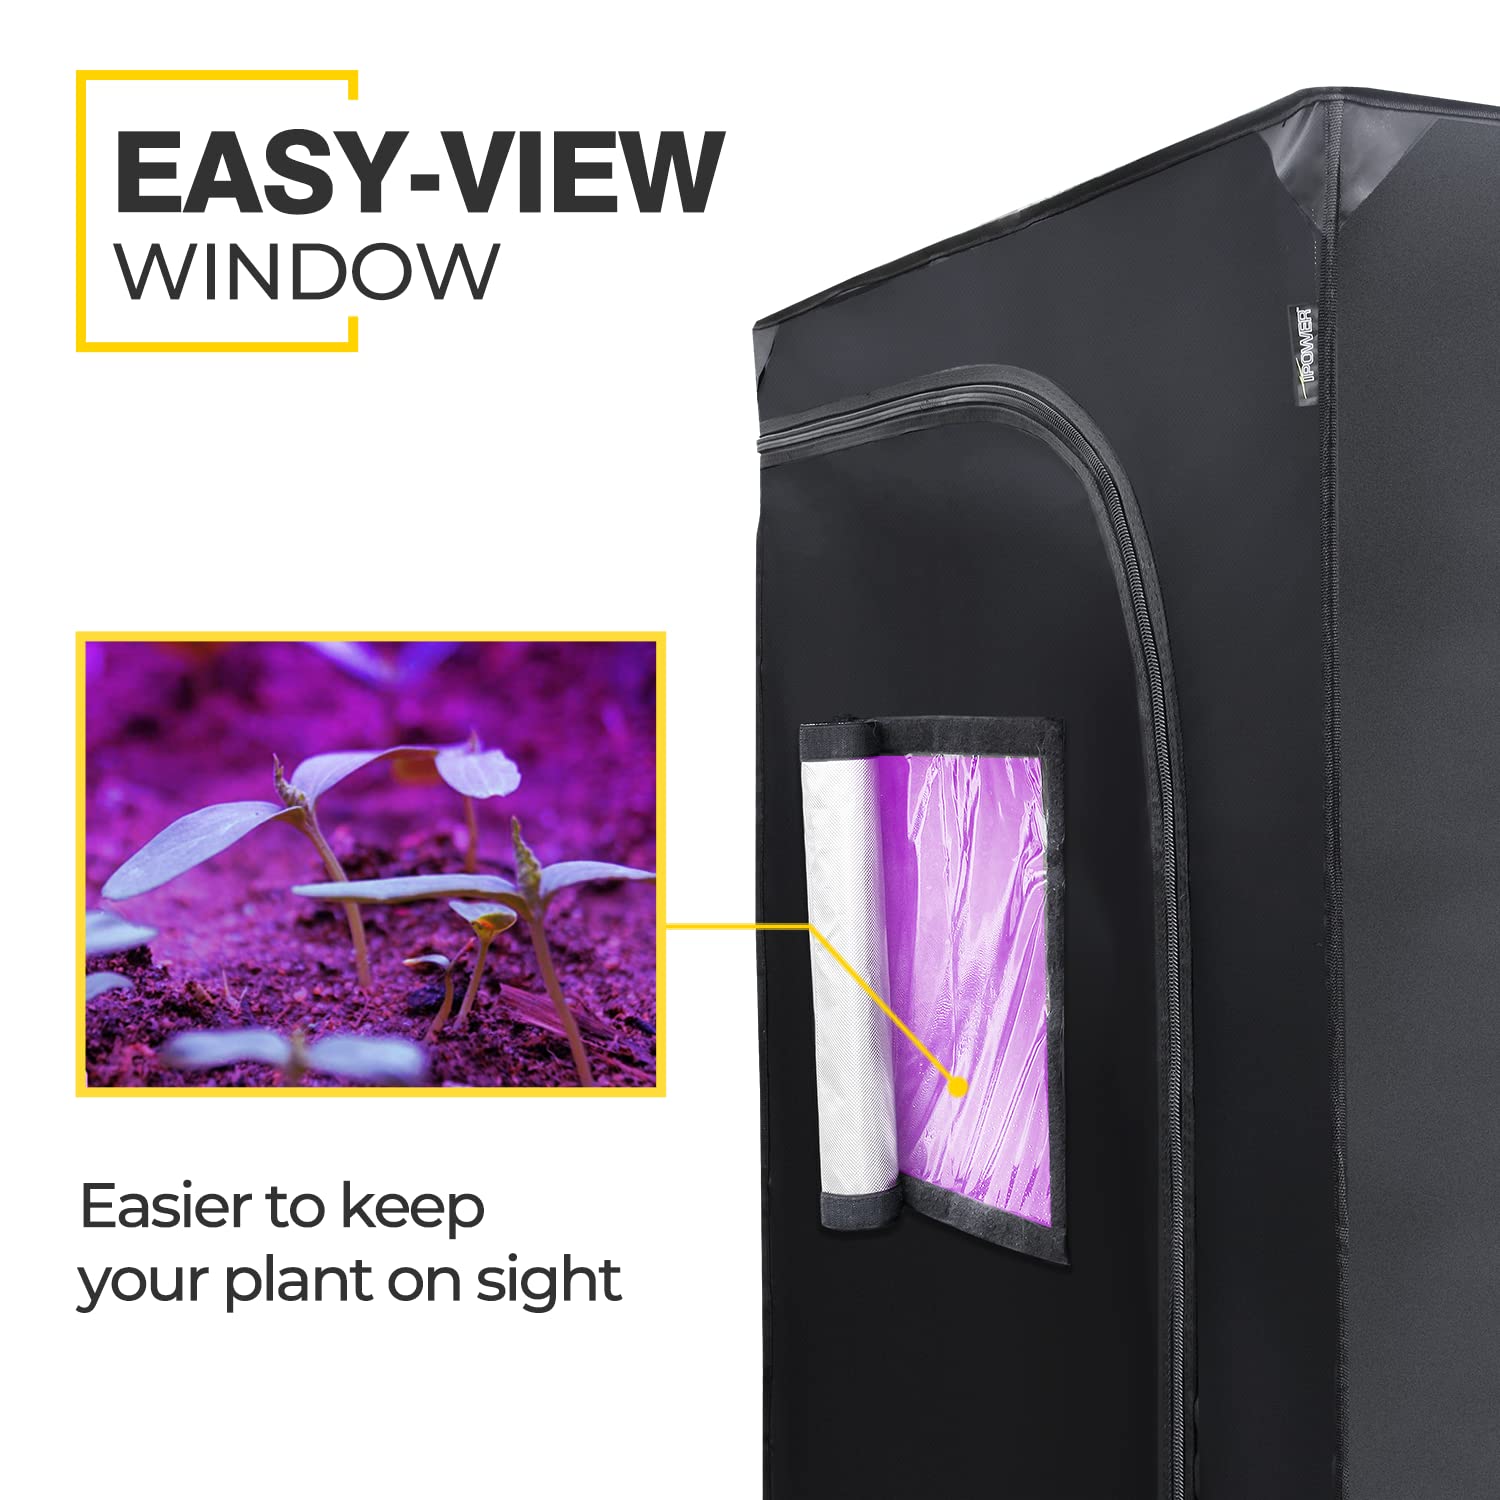 iPower Hydroponic Grow Tent, Water-Resistant Mylar, with Removable Floor Tray, Observation Window and Tool Bag, for Indoor Plant Seedling, Propagation, Blossom, 36" x 36" x 72", Black